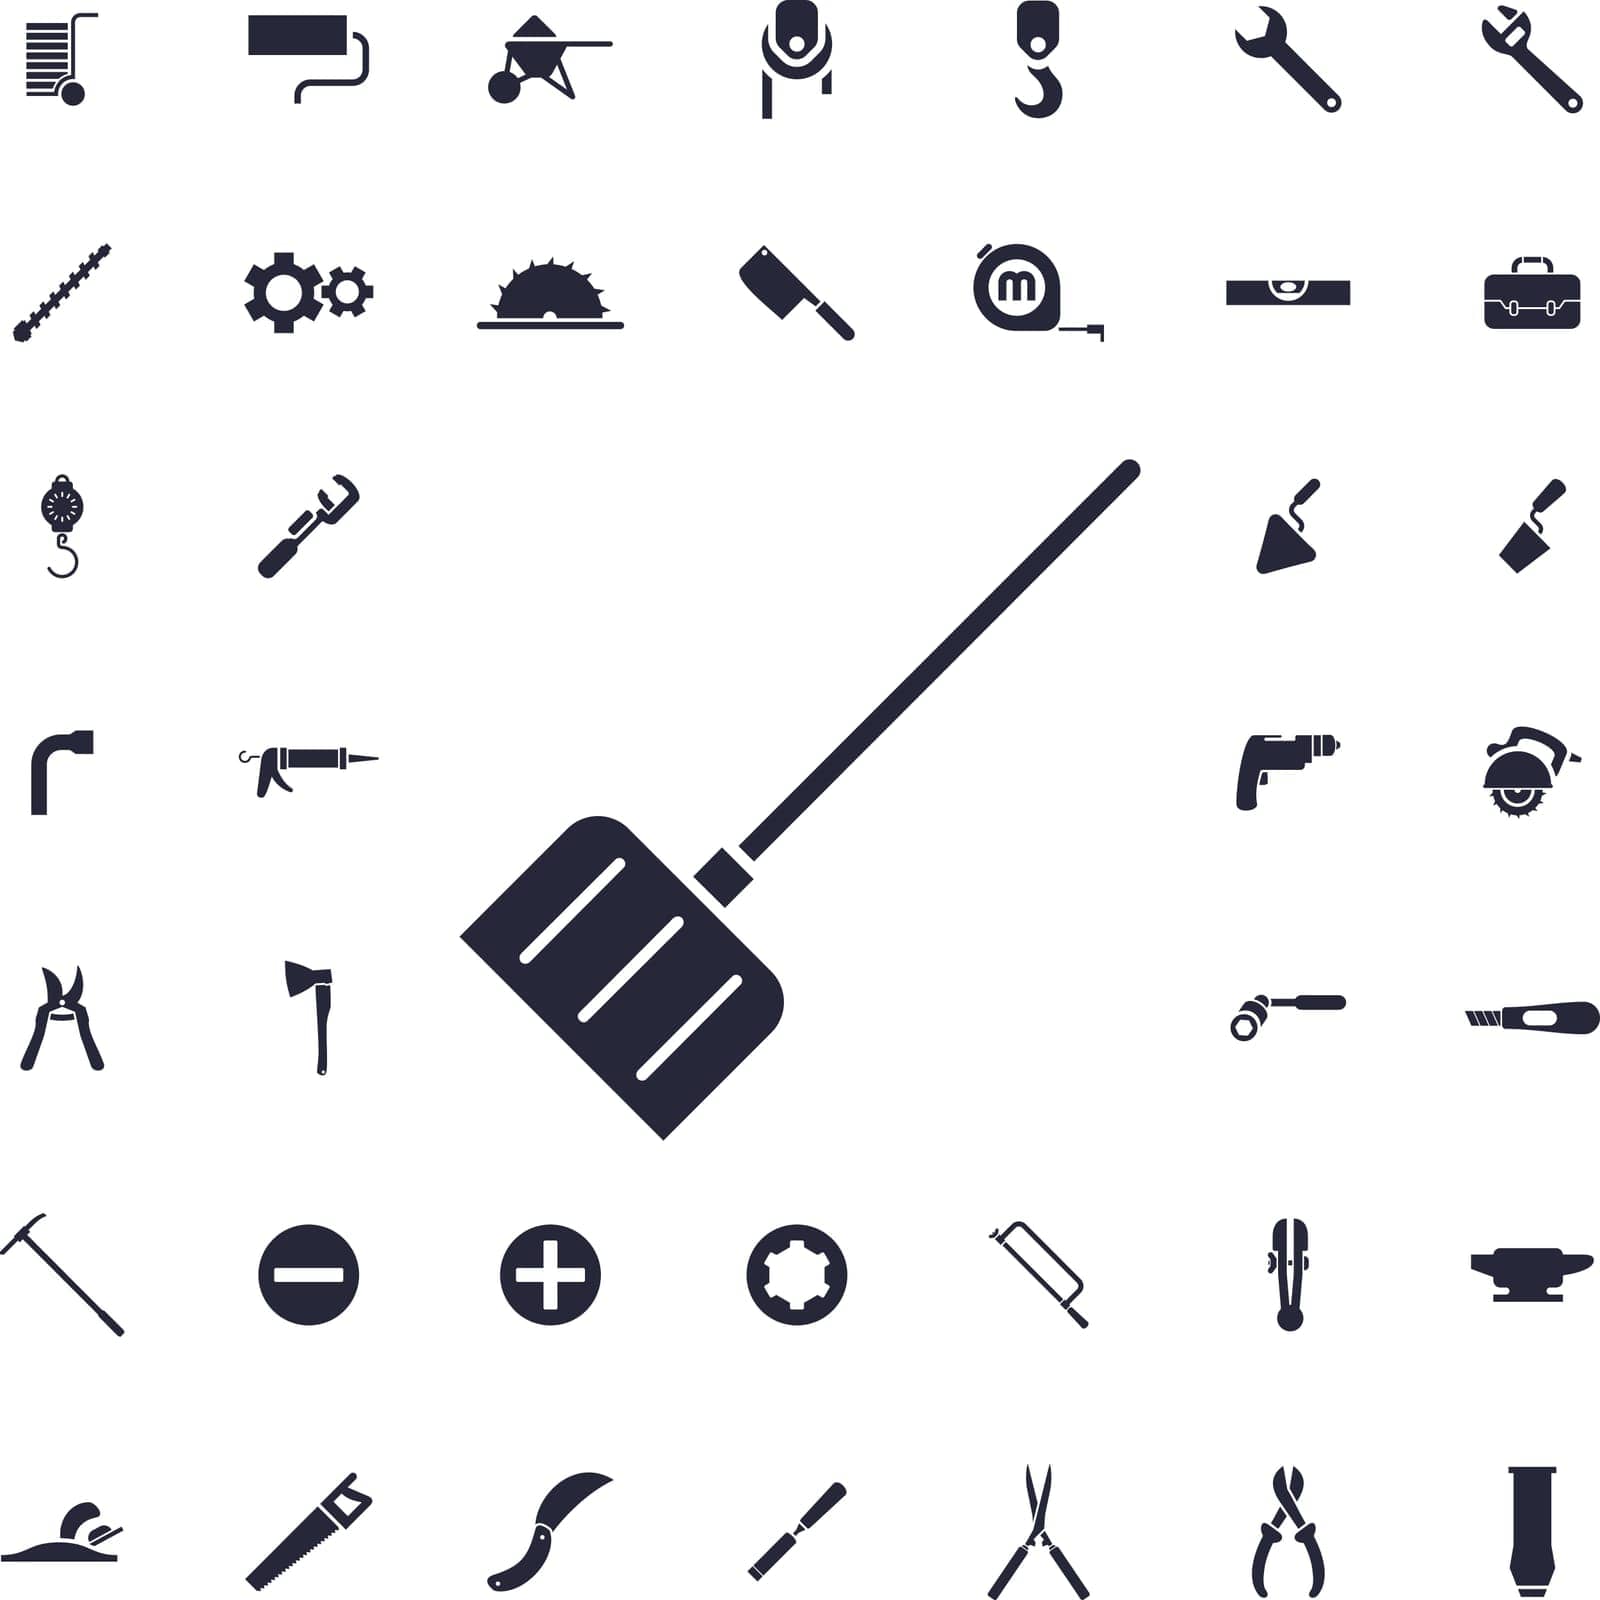 symbol,steel,dig,gardening,icon,sign,shovel,winter,ice,manual,digger,remove,blade,freeze,lifting,excavation,vector,hand,hardware,handtool,work,equipment,handle,spade,tool,hole,snow,shoveling,removal,ground,illustration,carry